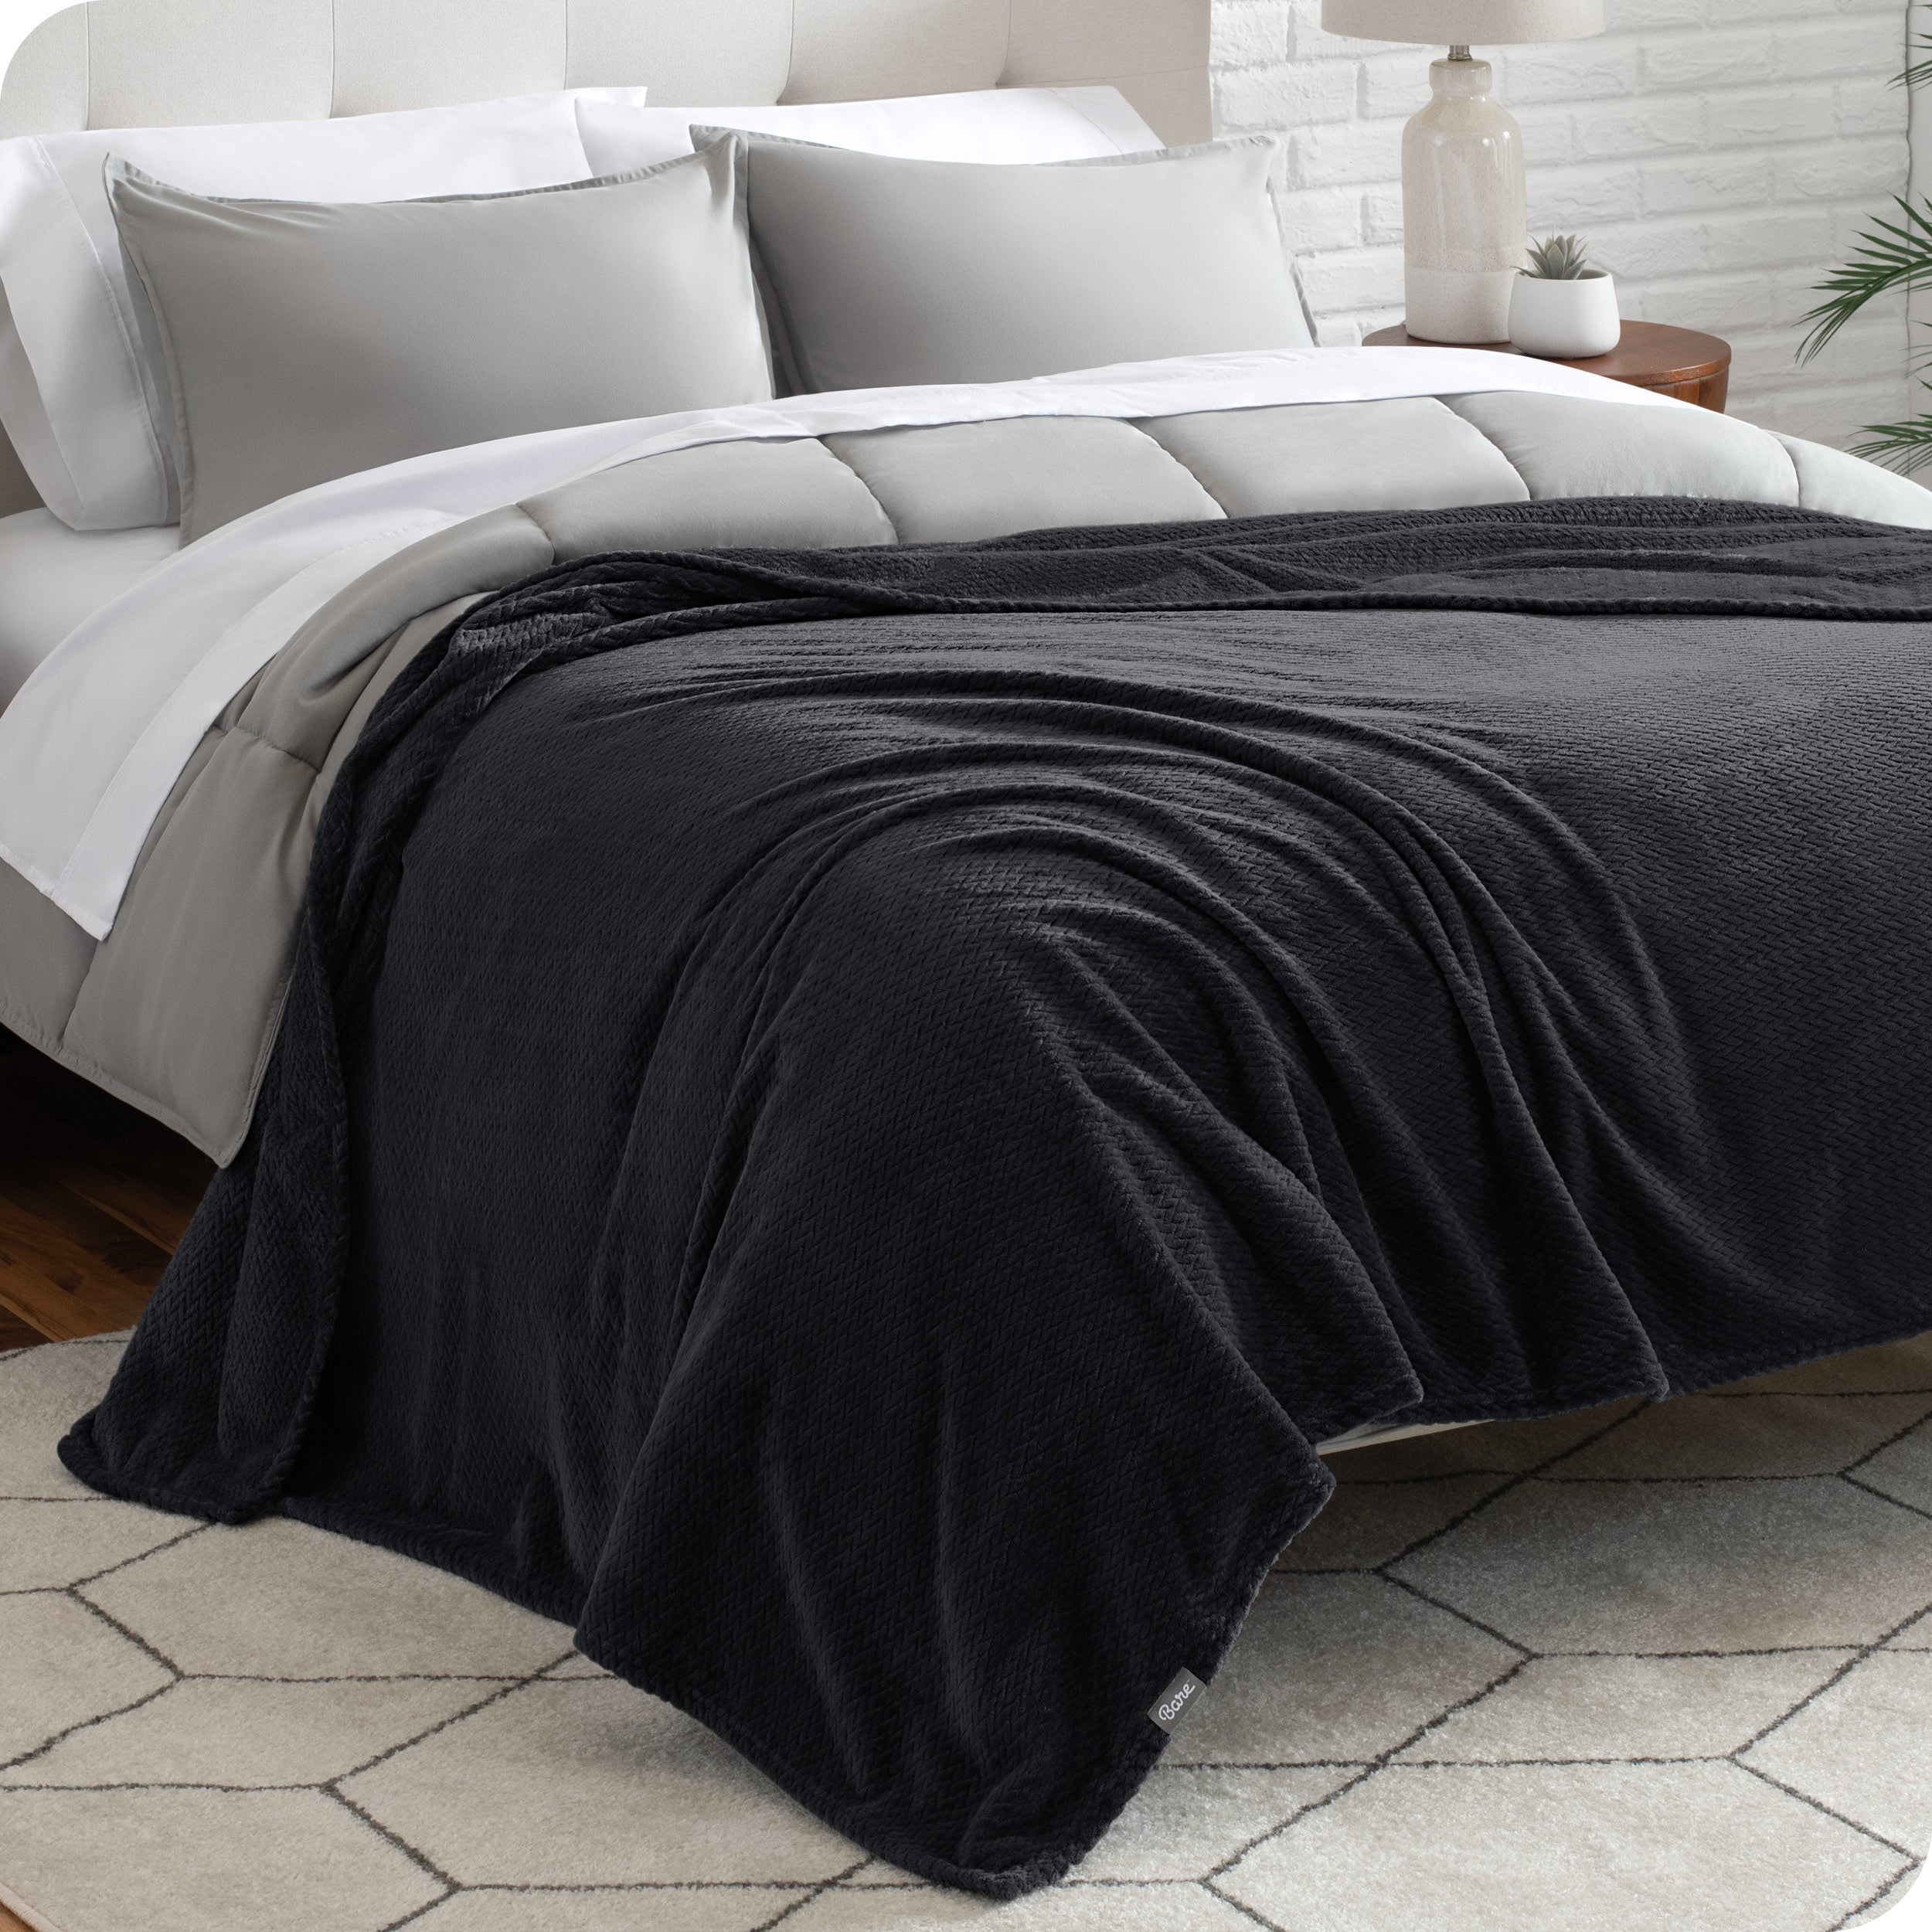 A textured microplush blanket is covering a bed, which has a comforter set on it.